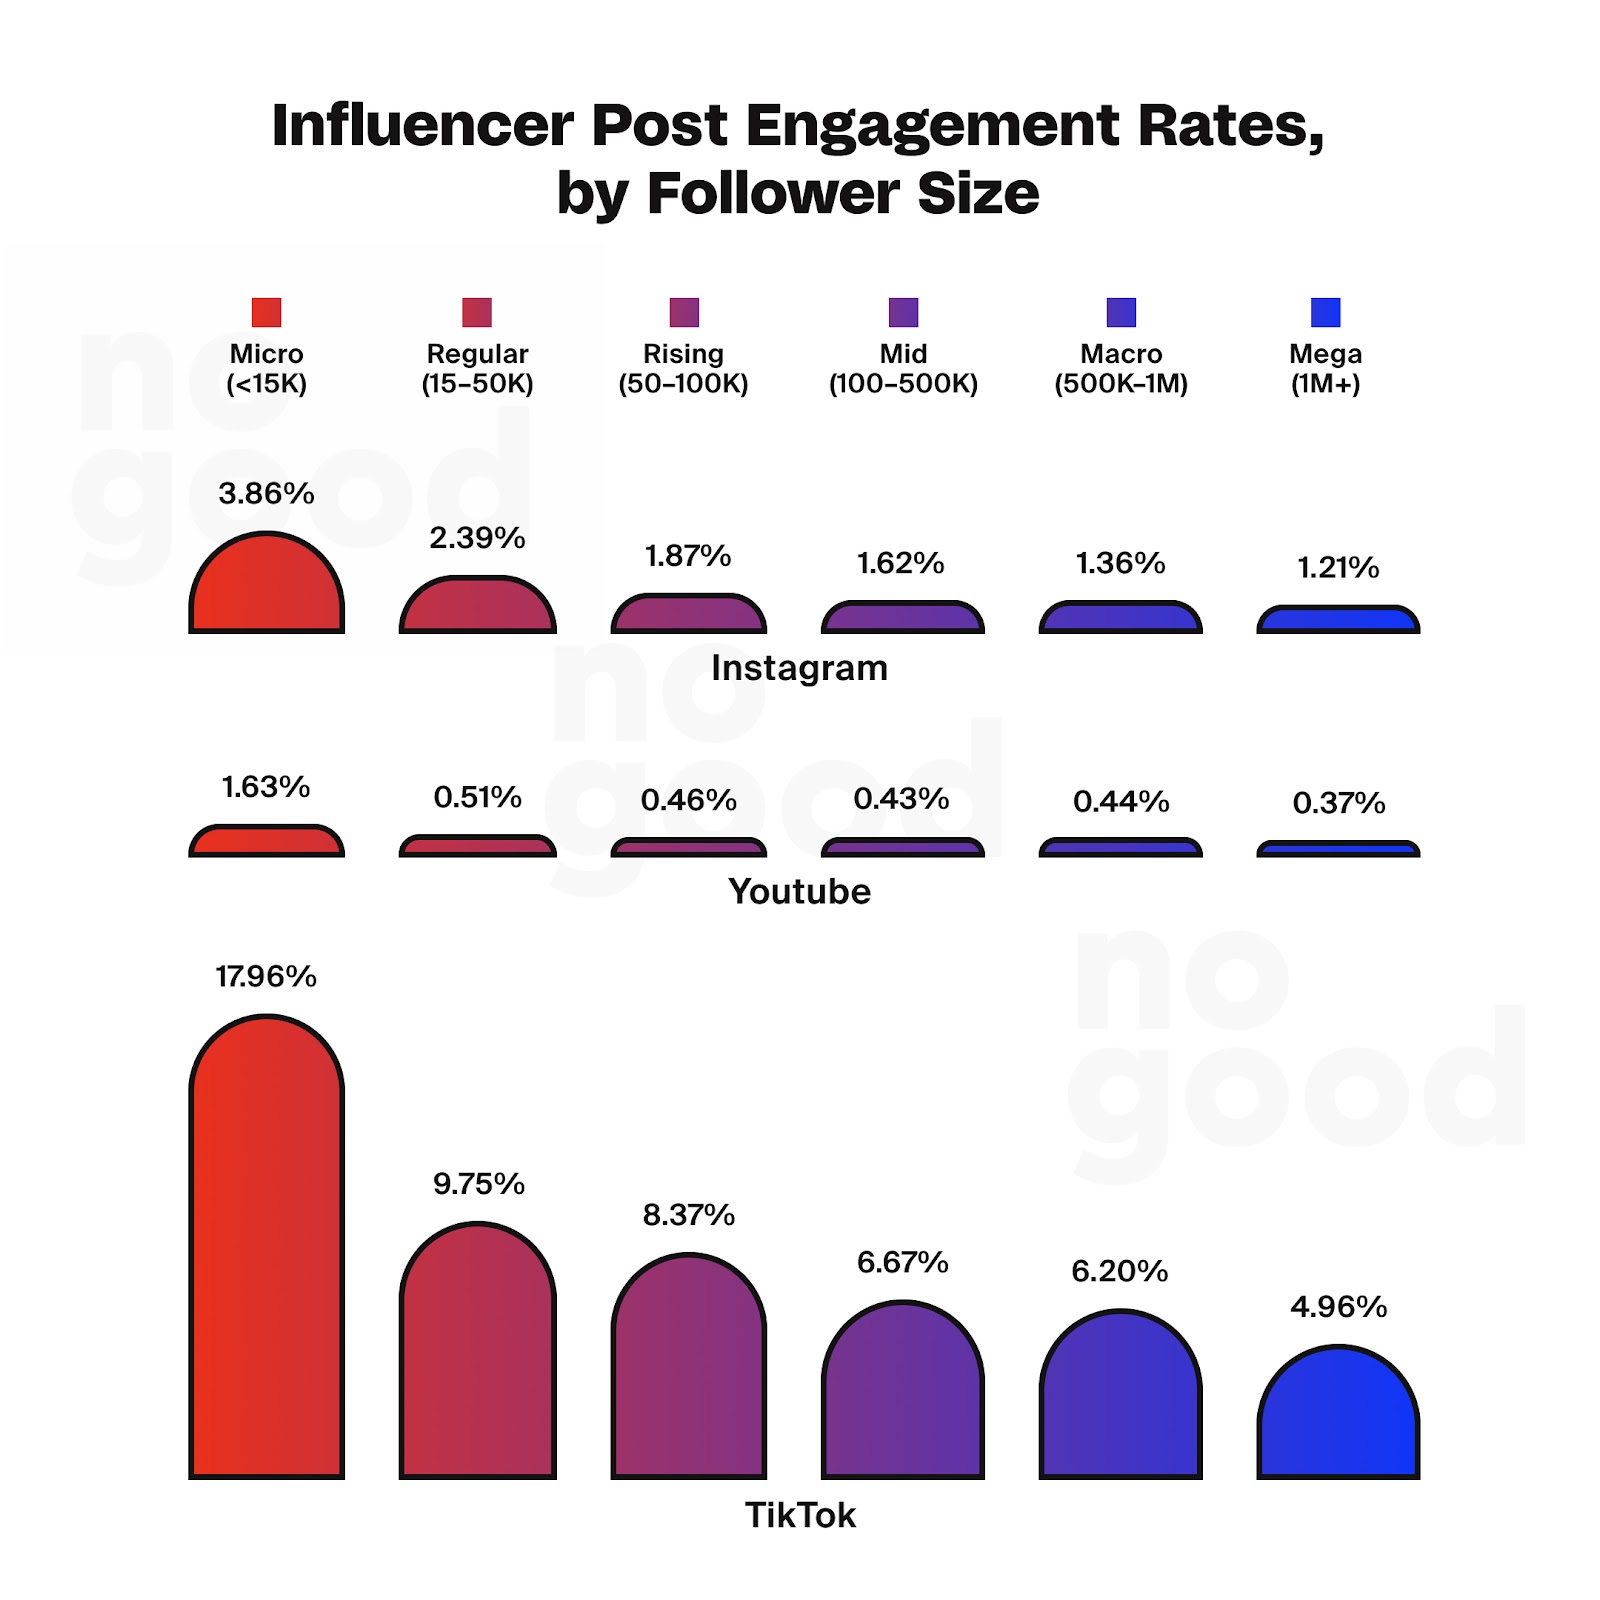 Influencer post engagement rates, by follower size.